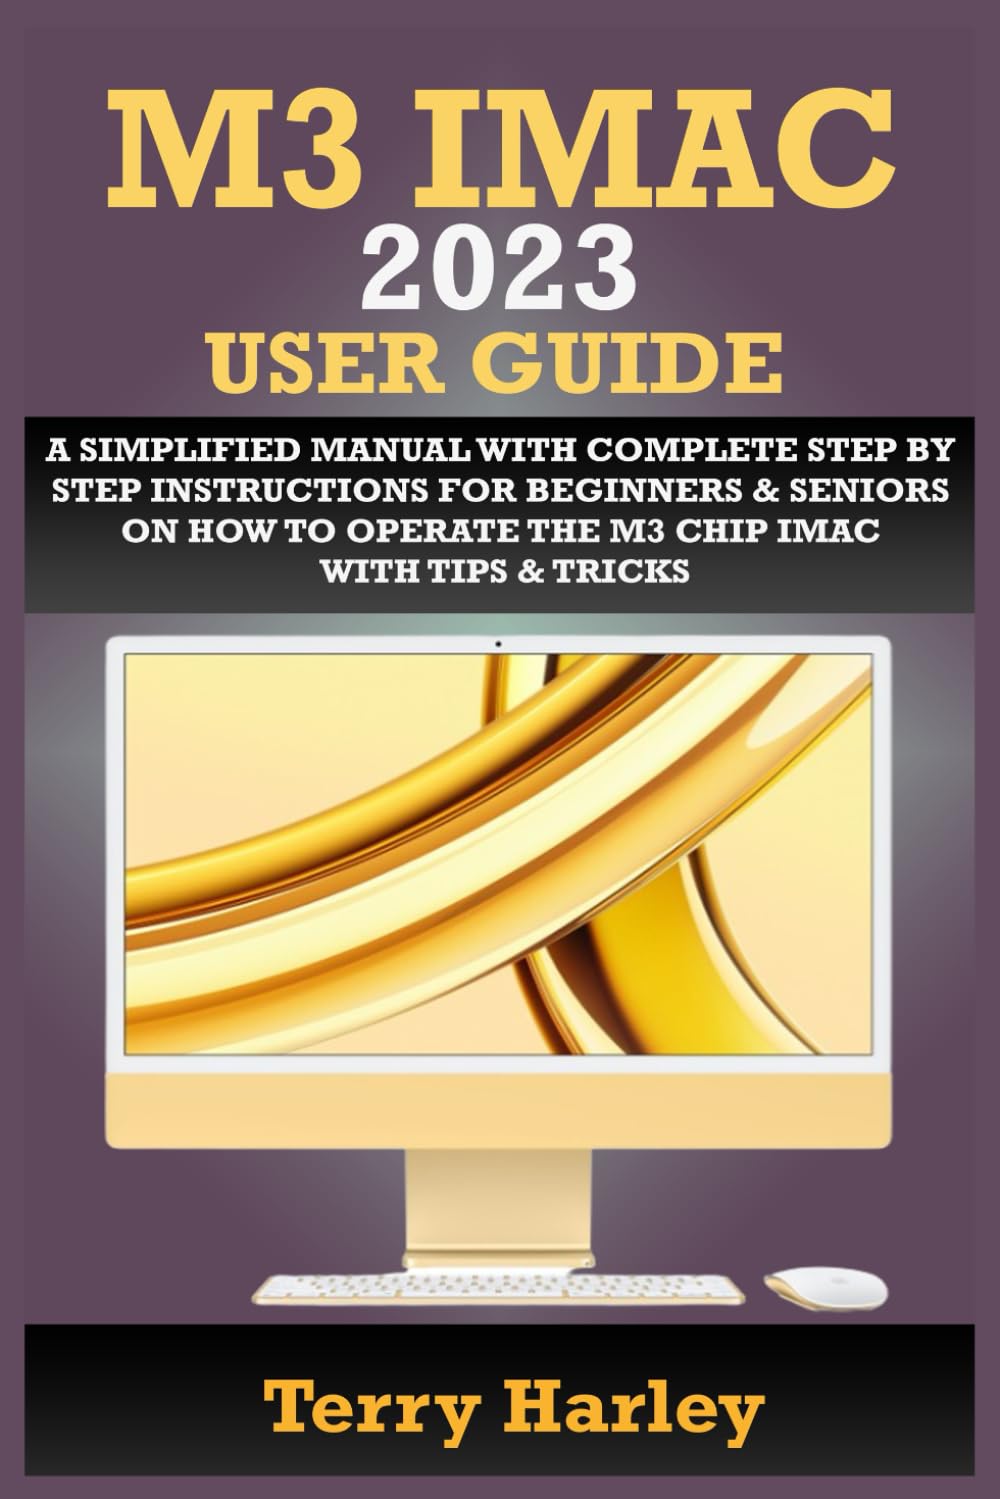 M3 IMAC 2023 USER GUIDE: A Simplified Manual With Complete Step By Step Instructions For Beginners & Seniors On How To Operate The M3 Chip iMac With Tips & Tricks